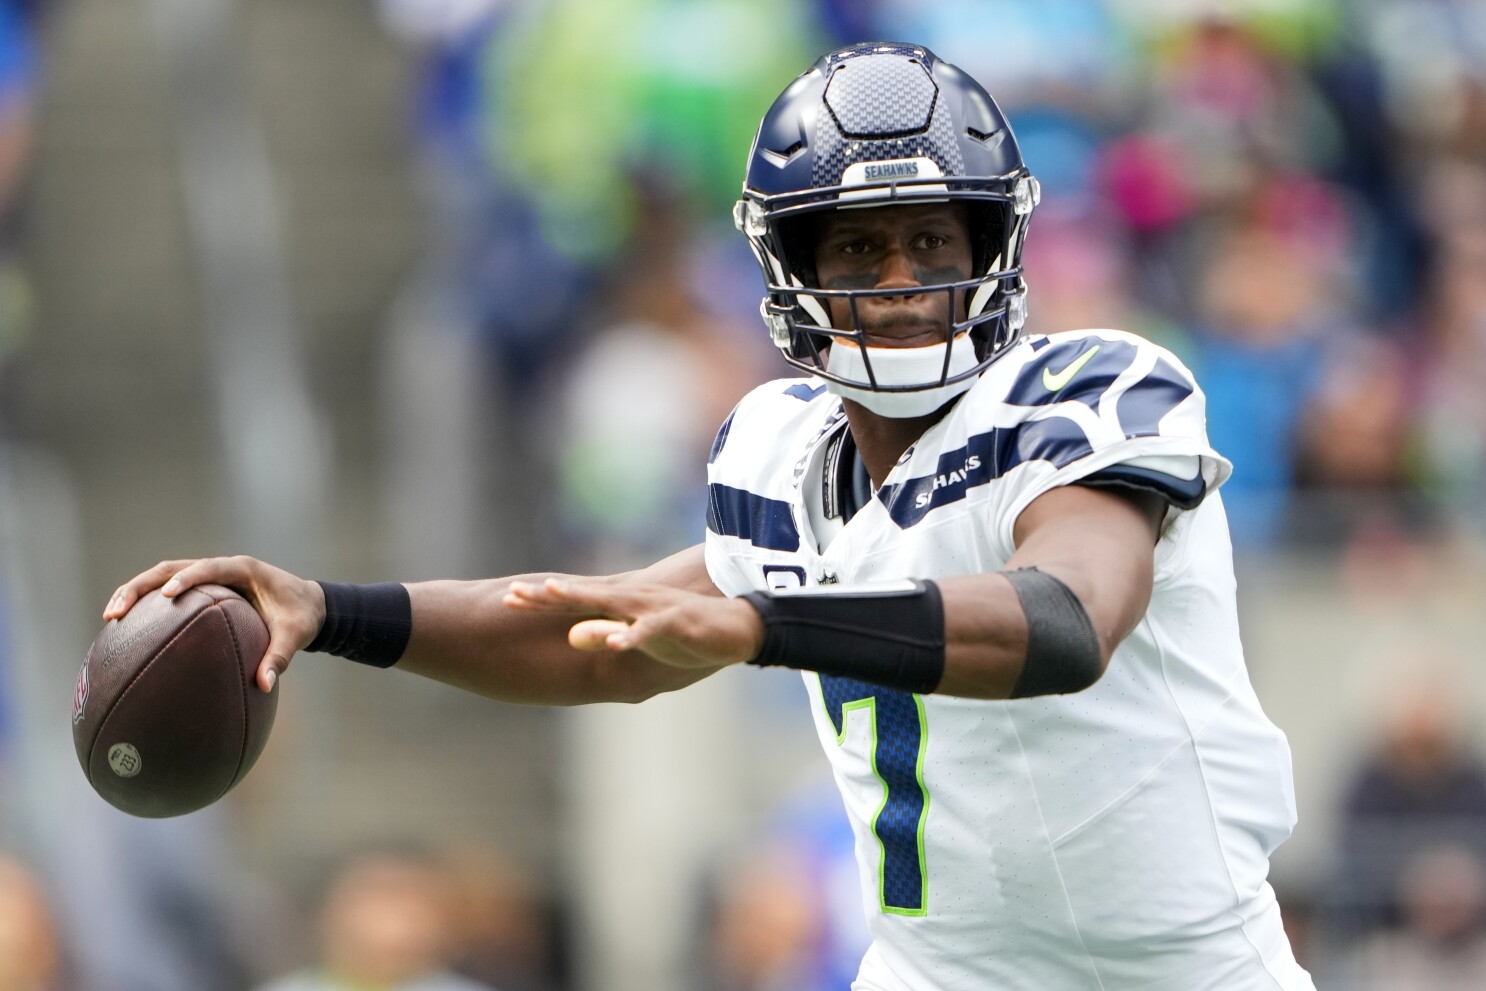 The Seahawks will try to remain perfect at MetLife Stadium when